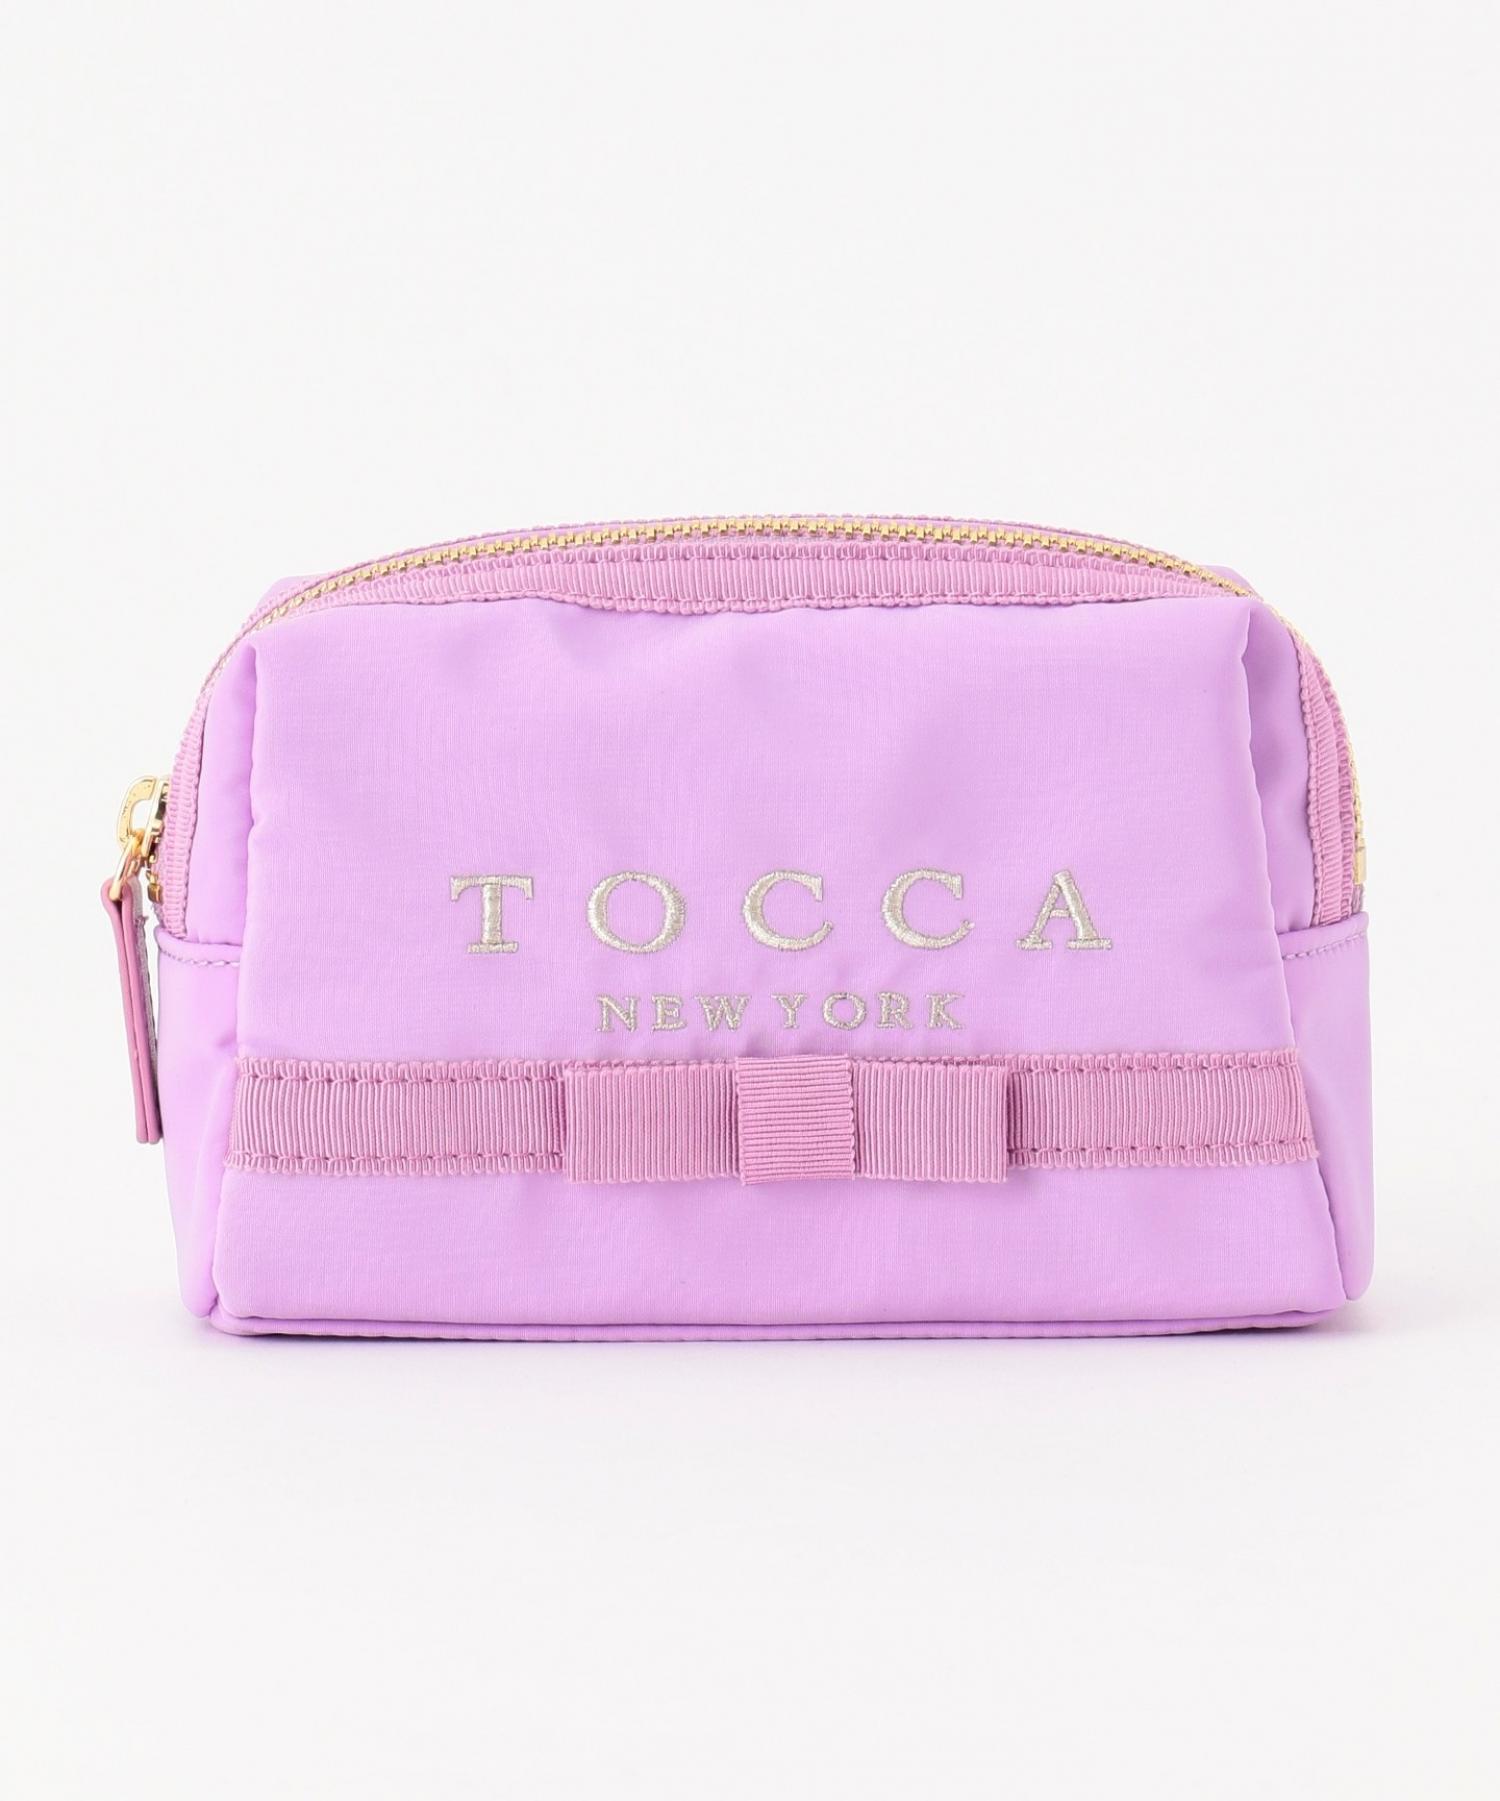 TOCCAT 初売り POUCH ポーチ 最大60％オフ